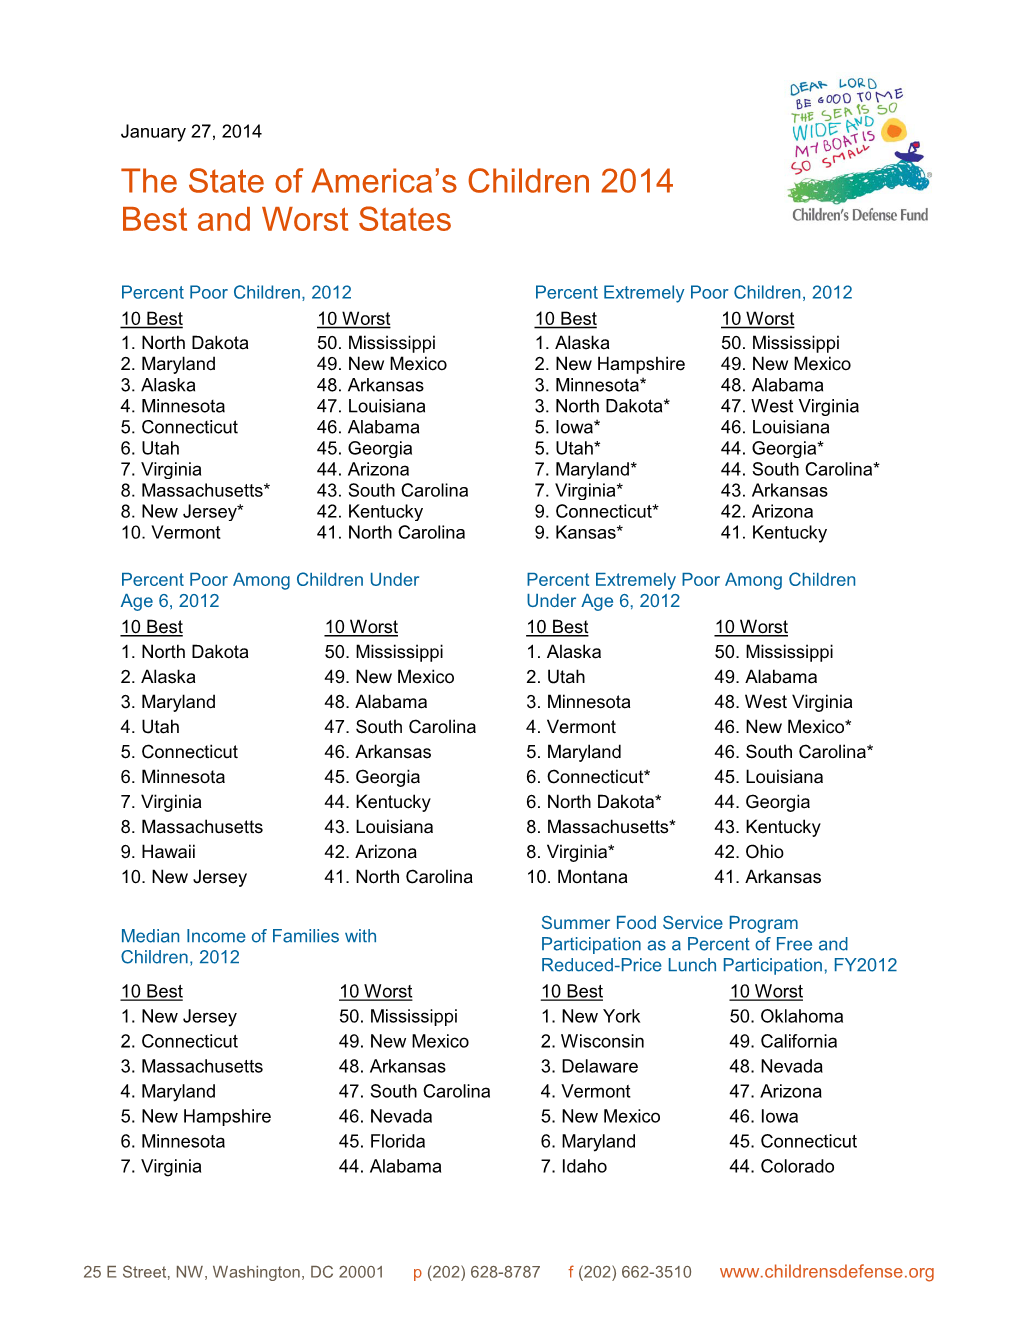 The State of America's Children 2014 Best and Worst States